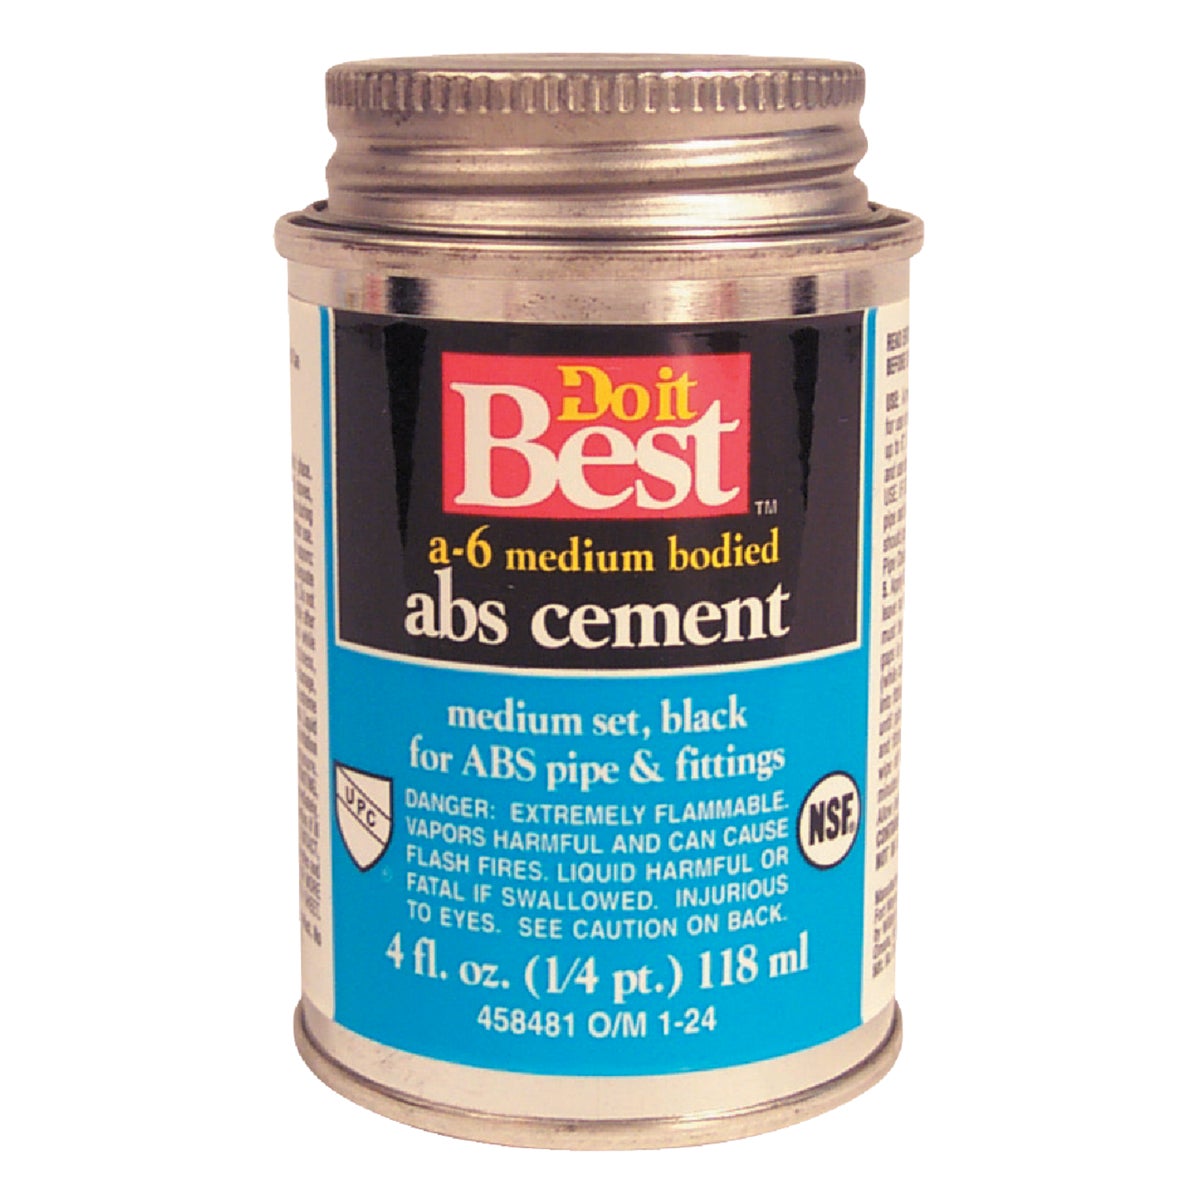 Item 458481, A-6 medium- bodied, medium set ABS black solvent cement designed for use on